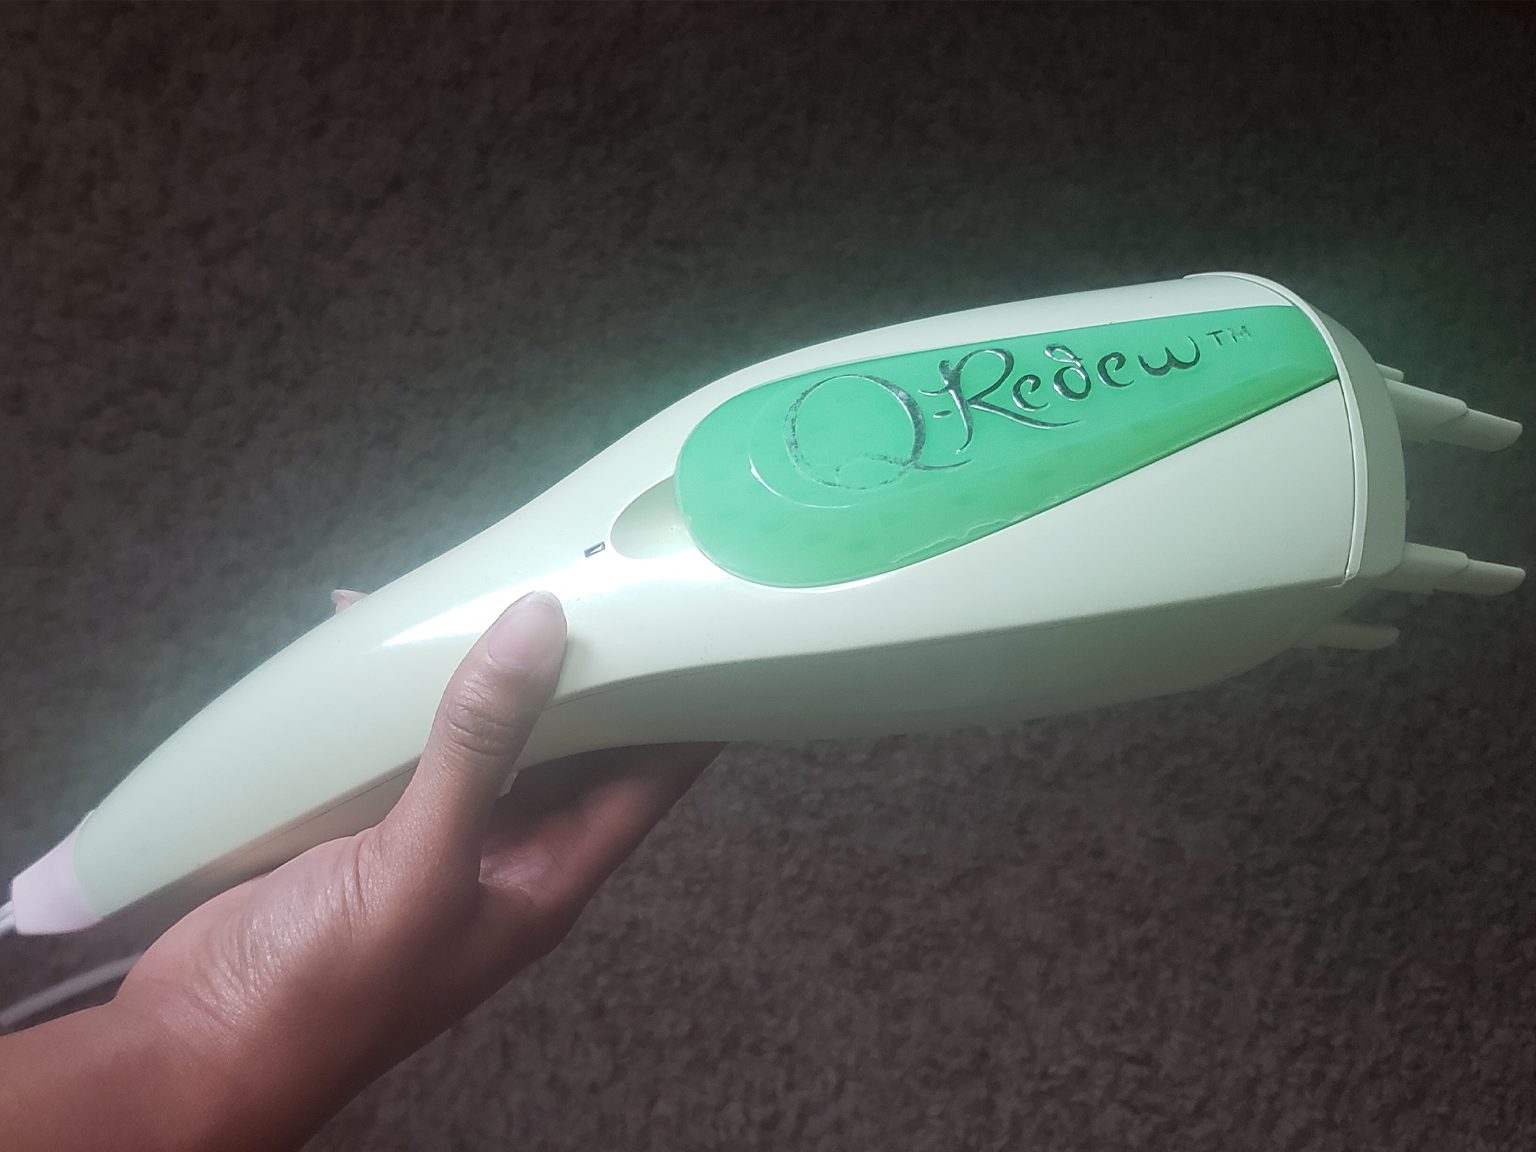 Product Review: Q-Redew Handheld Hair Steamer - Curly Hair Adventures